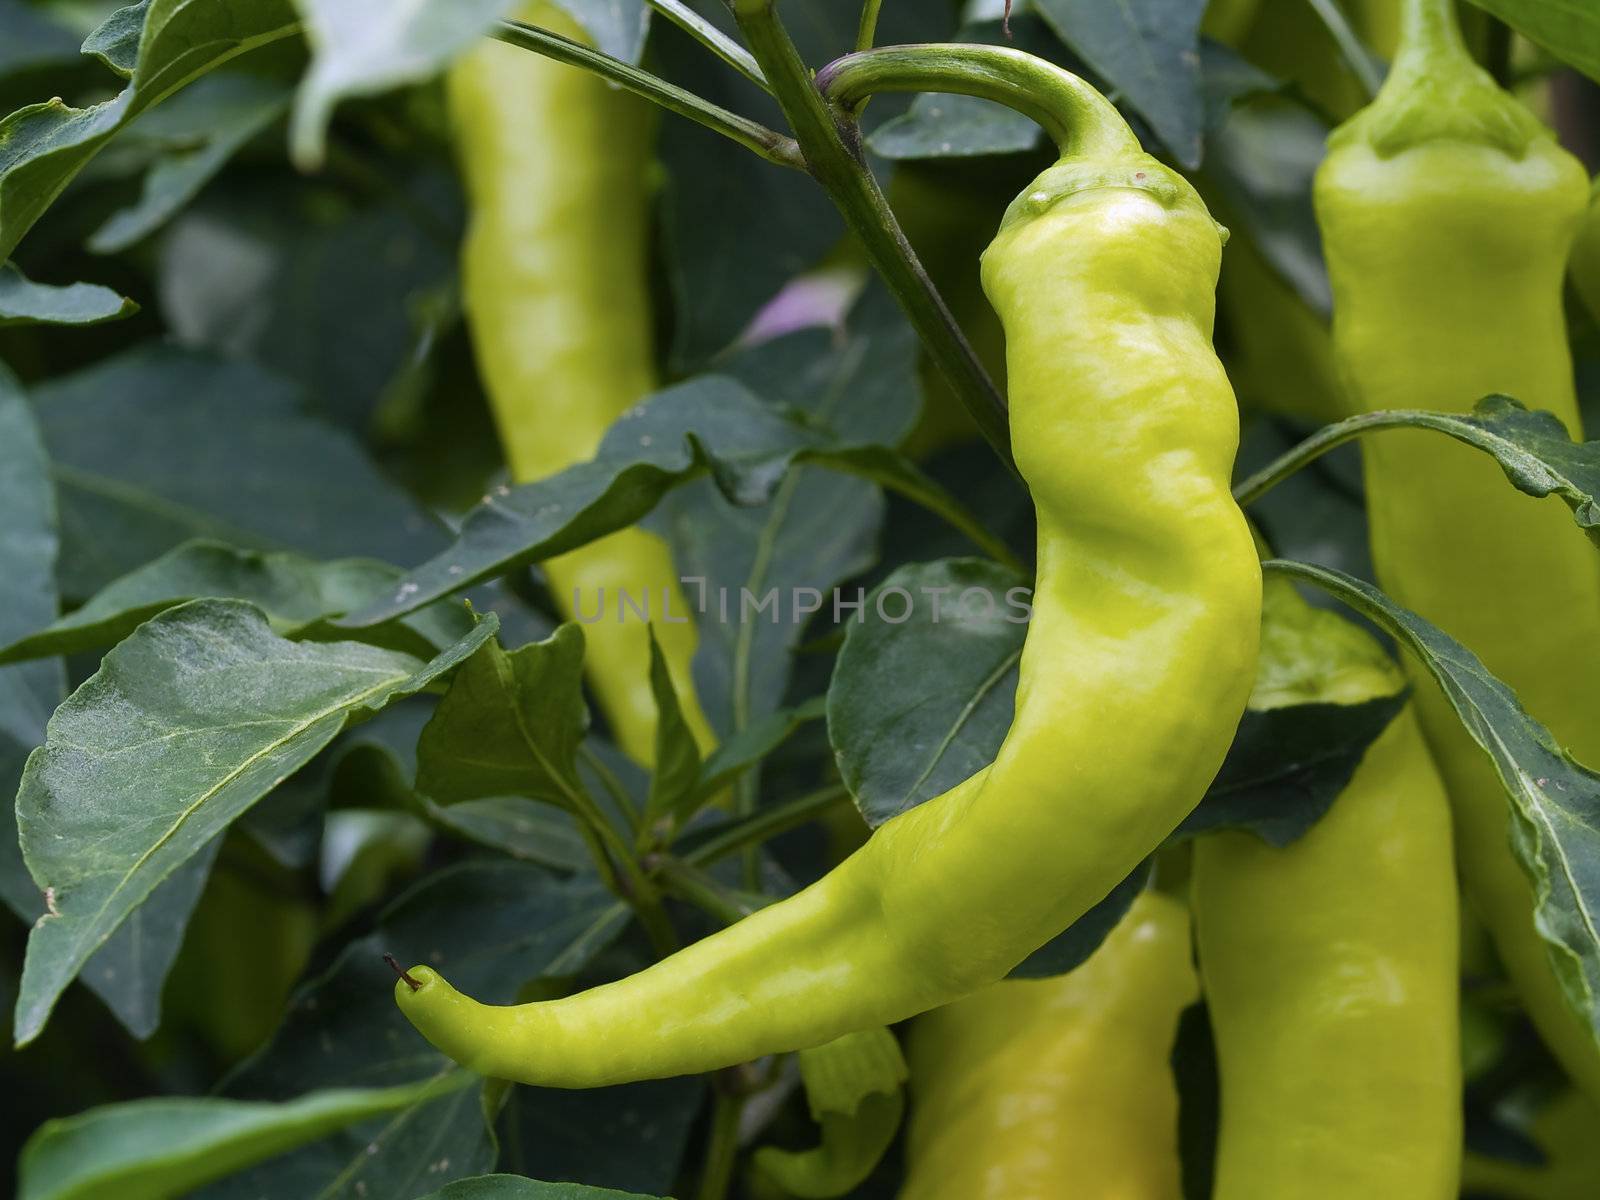 Green Peppers on the plant needing picked